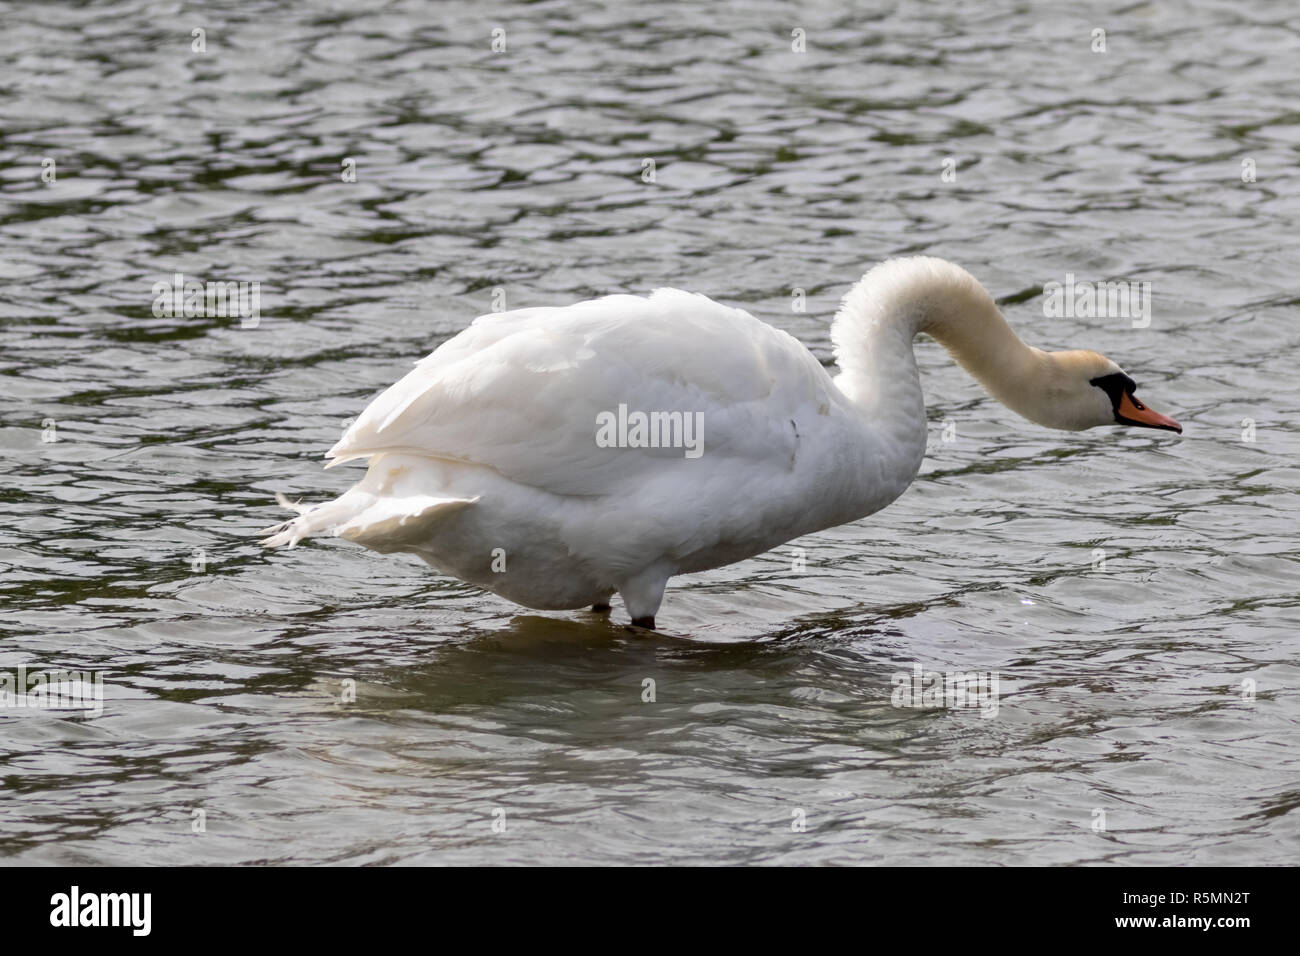 swan with outstretched neck Stock Photo